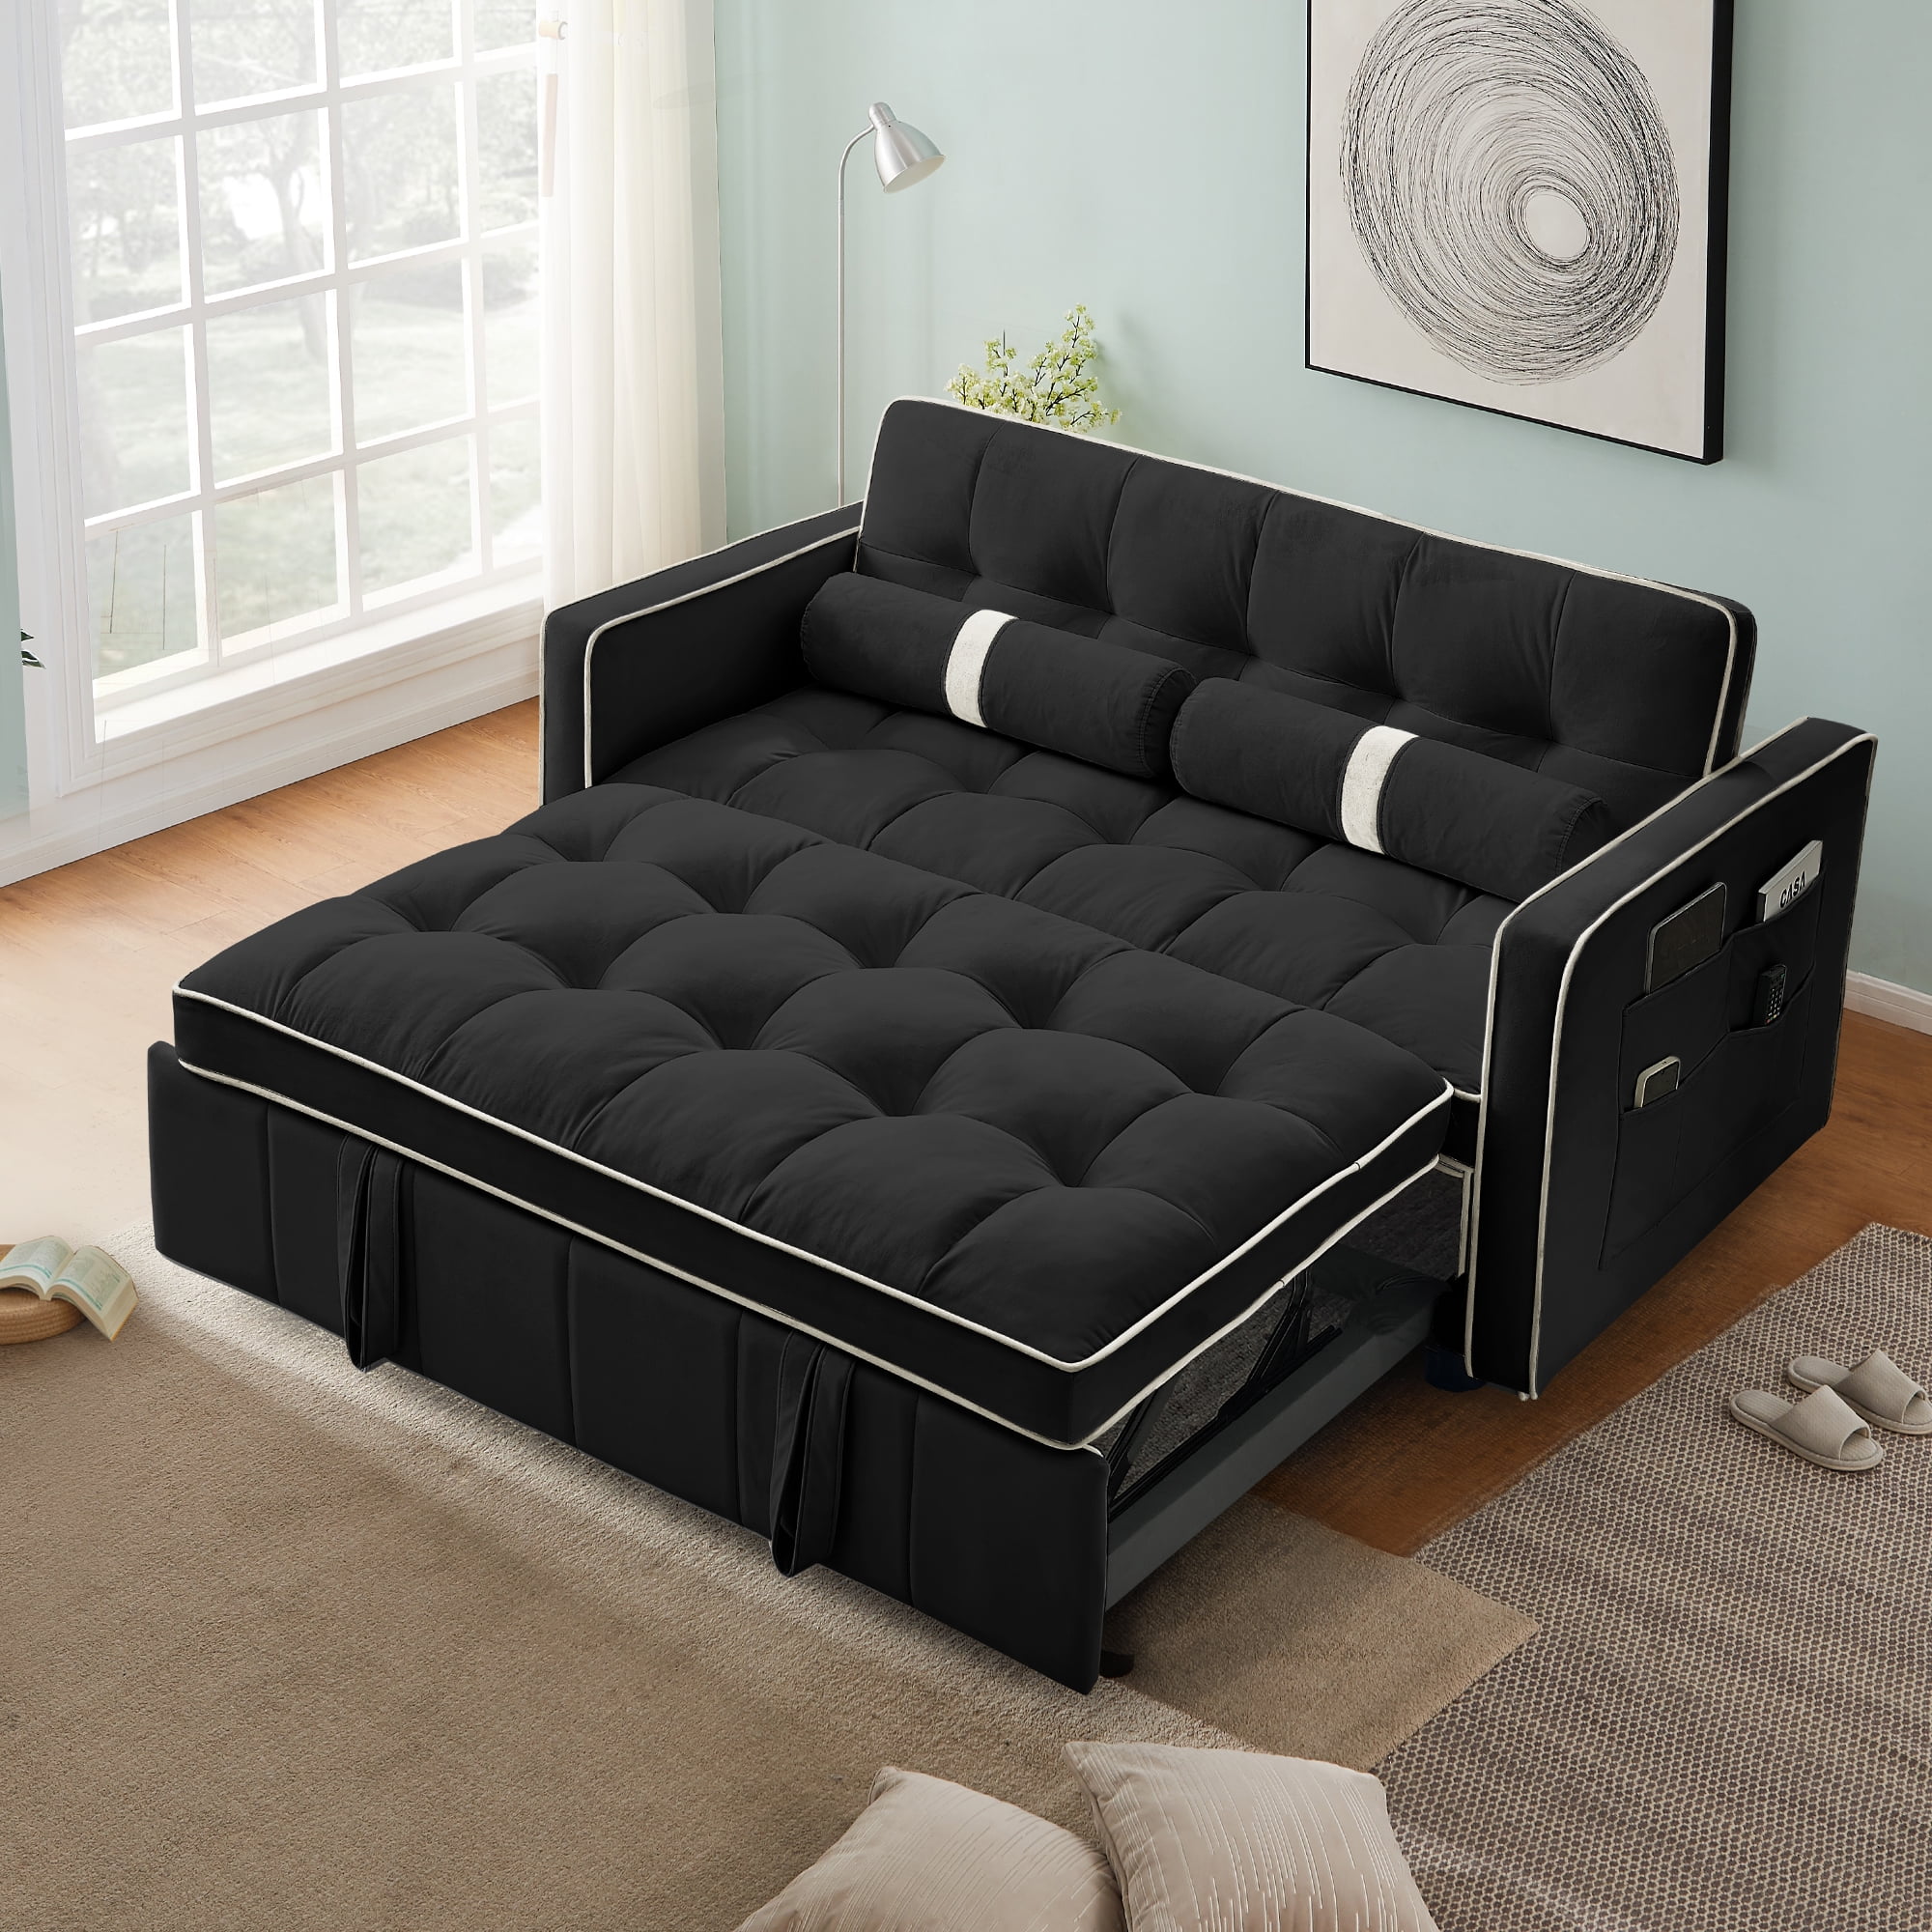 Muumblus 55 5 Pull Out Sofa Bed 2